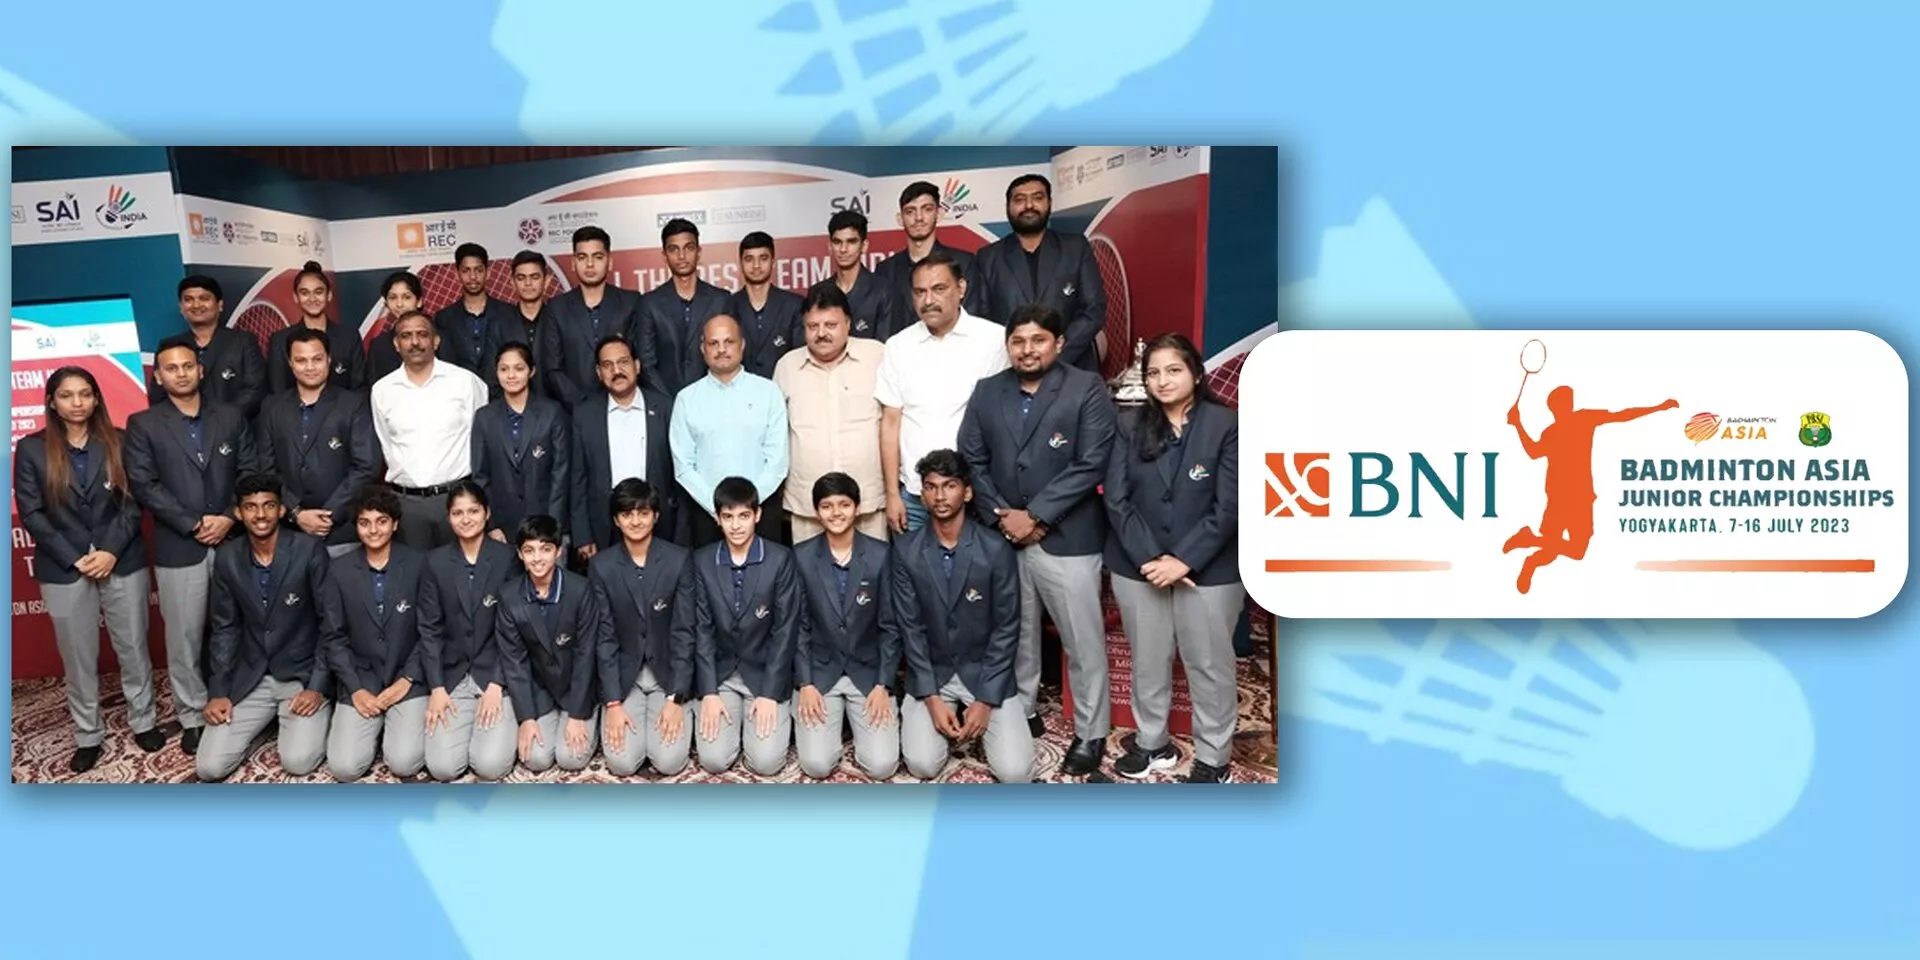 Badminton Asia Junior Championships 2023 Updated schedule, fixtures, results and live streaming details